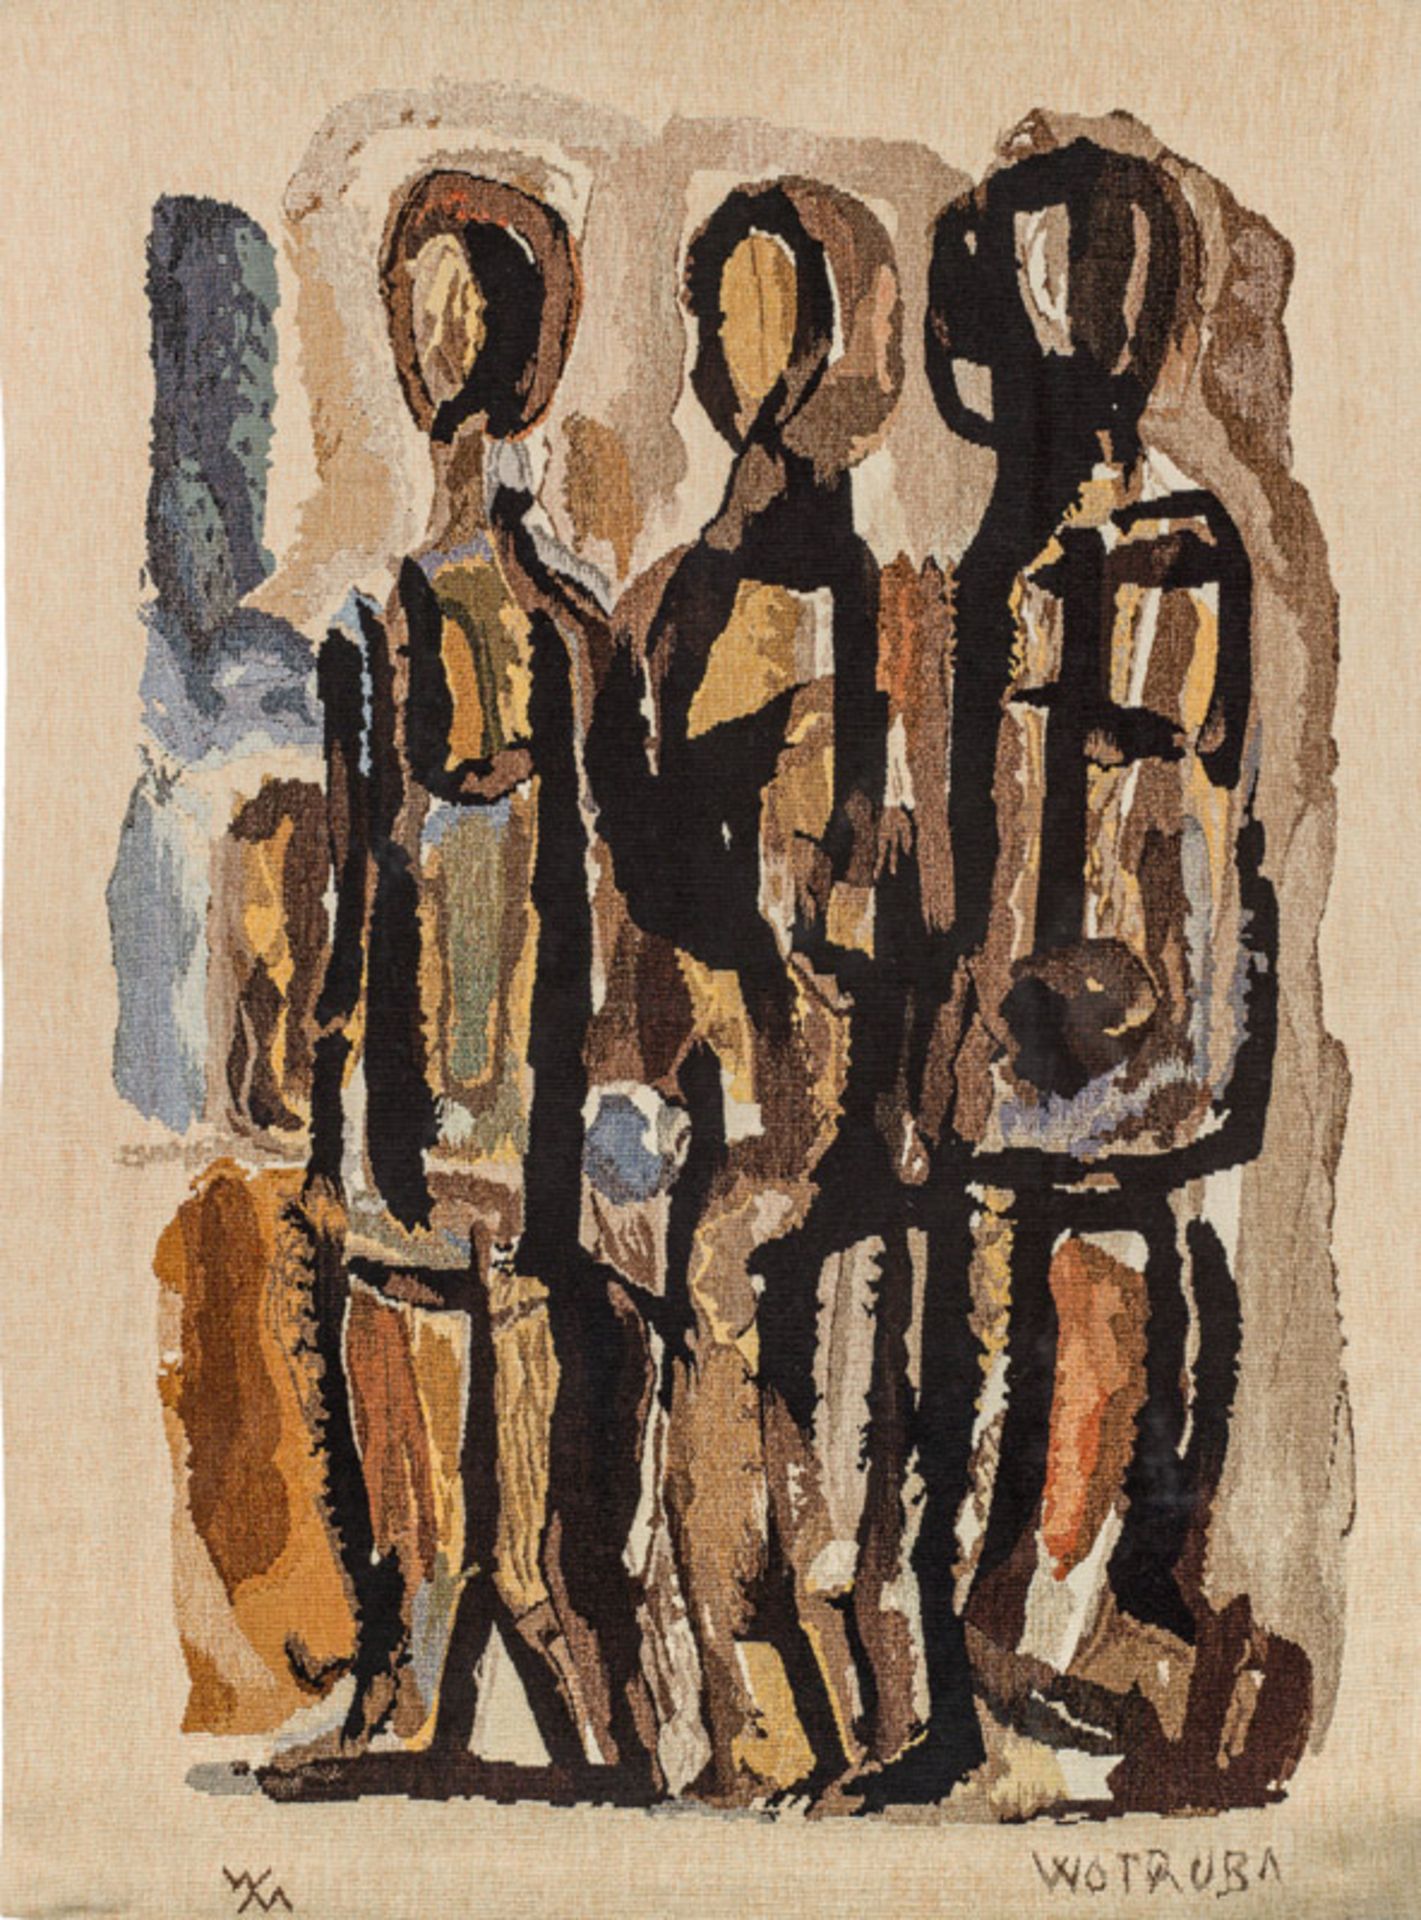 Fritz Wotruba* Three figures (tapestry after a design by the artist from 1957), 1981/82